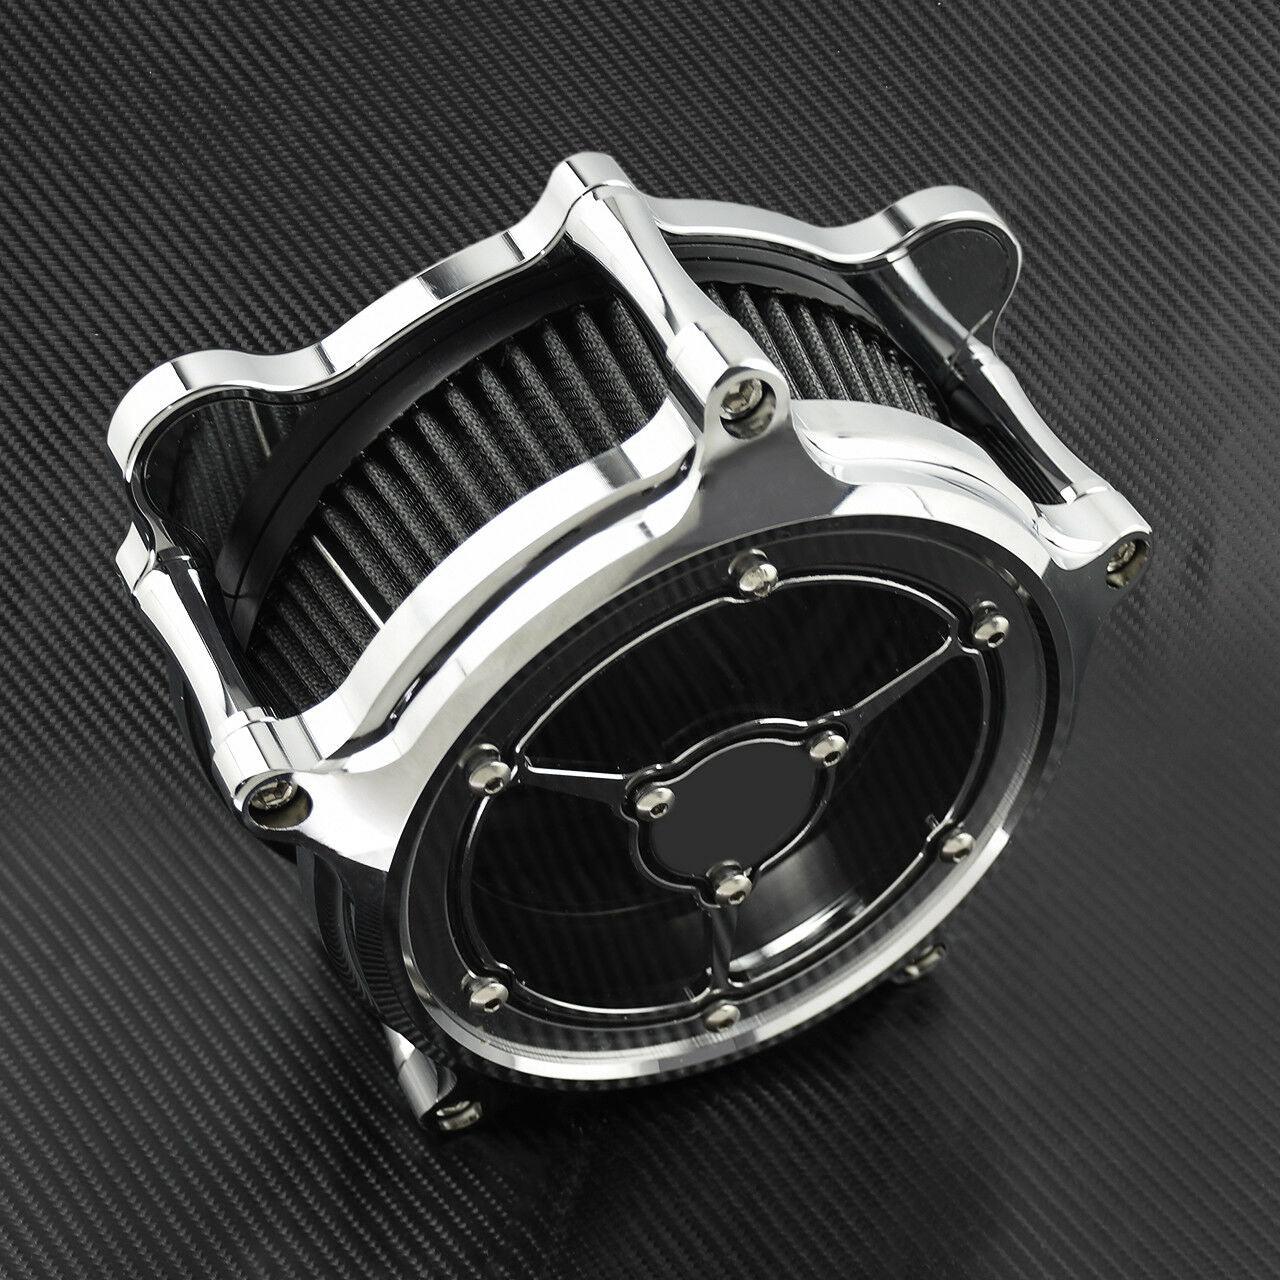 All Chrome Air Cleaner Intake Filter Fit For Touring 00-07 Dyna Softail 00-15 - Moto Life Products